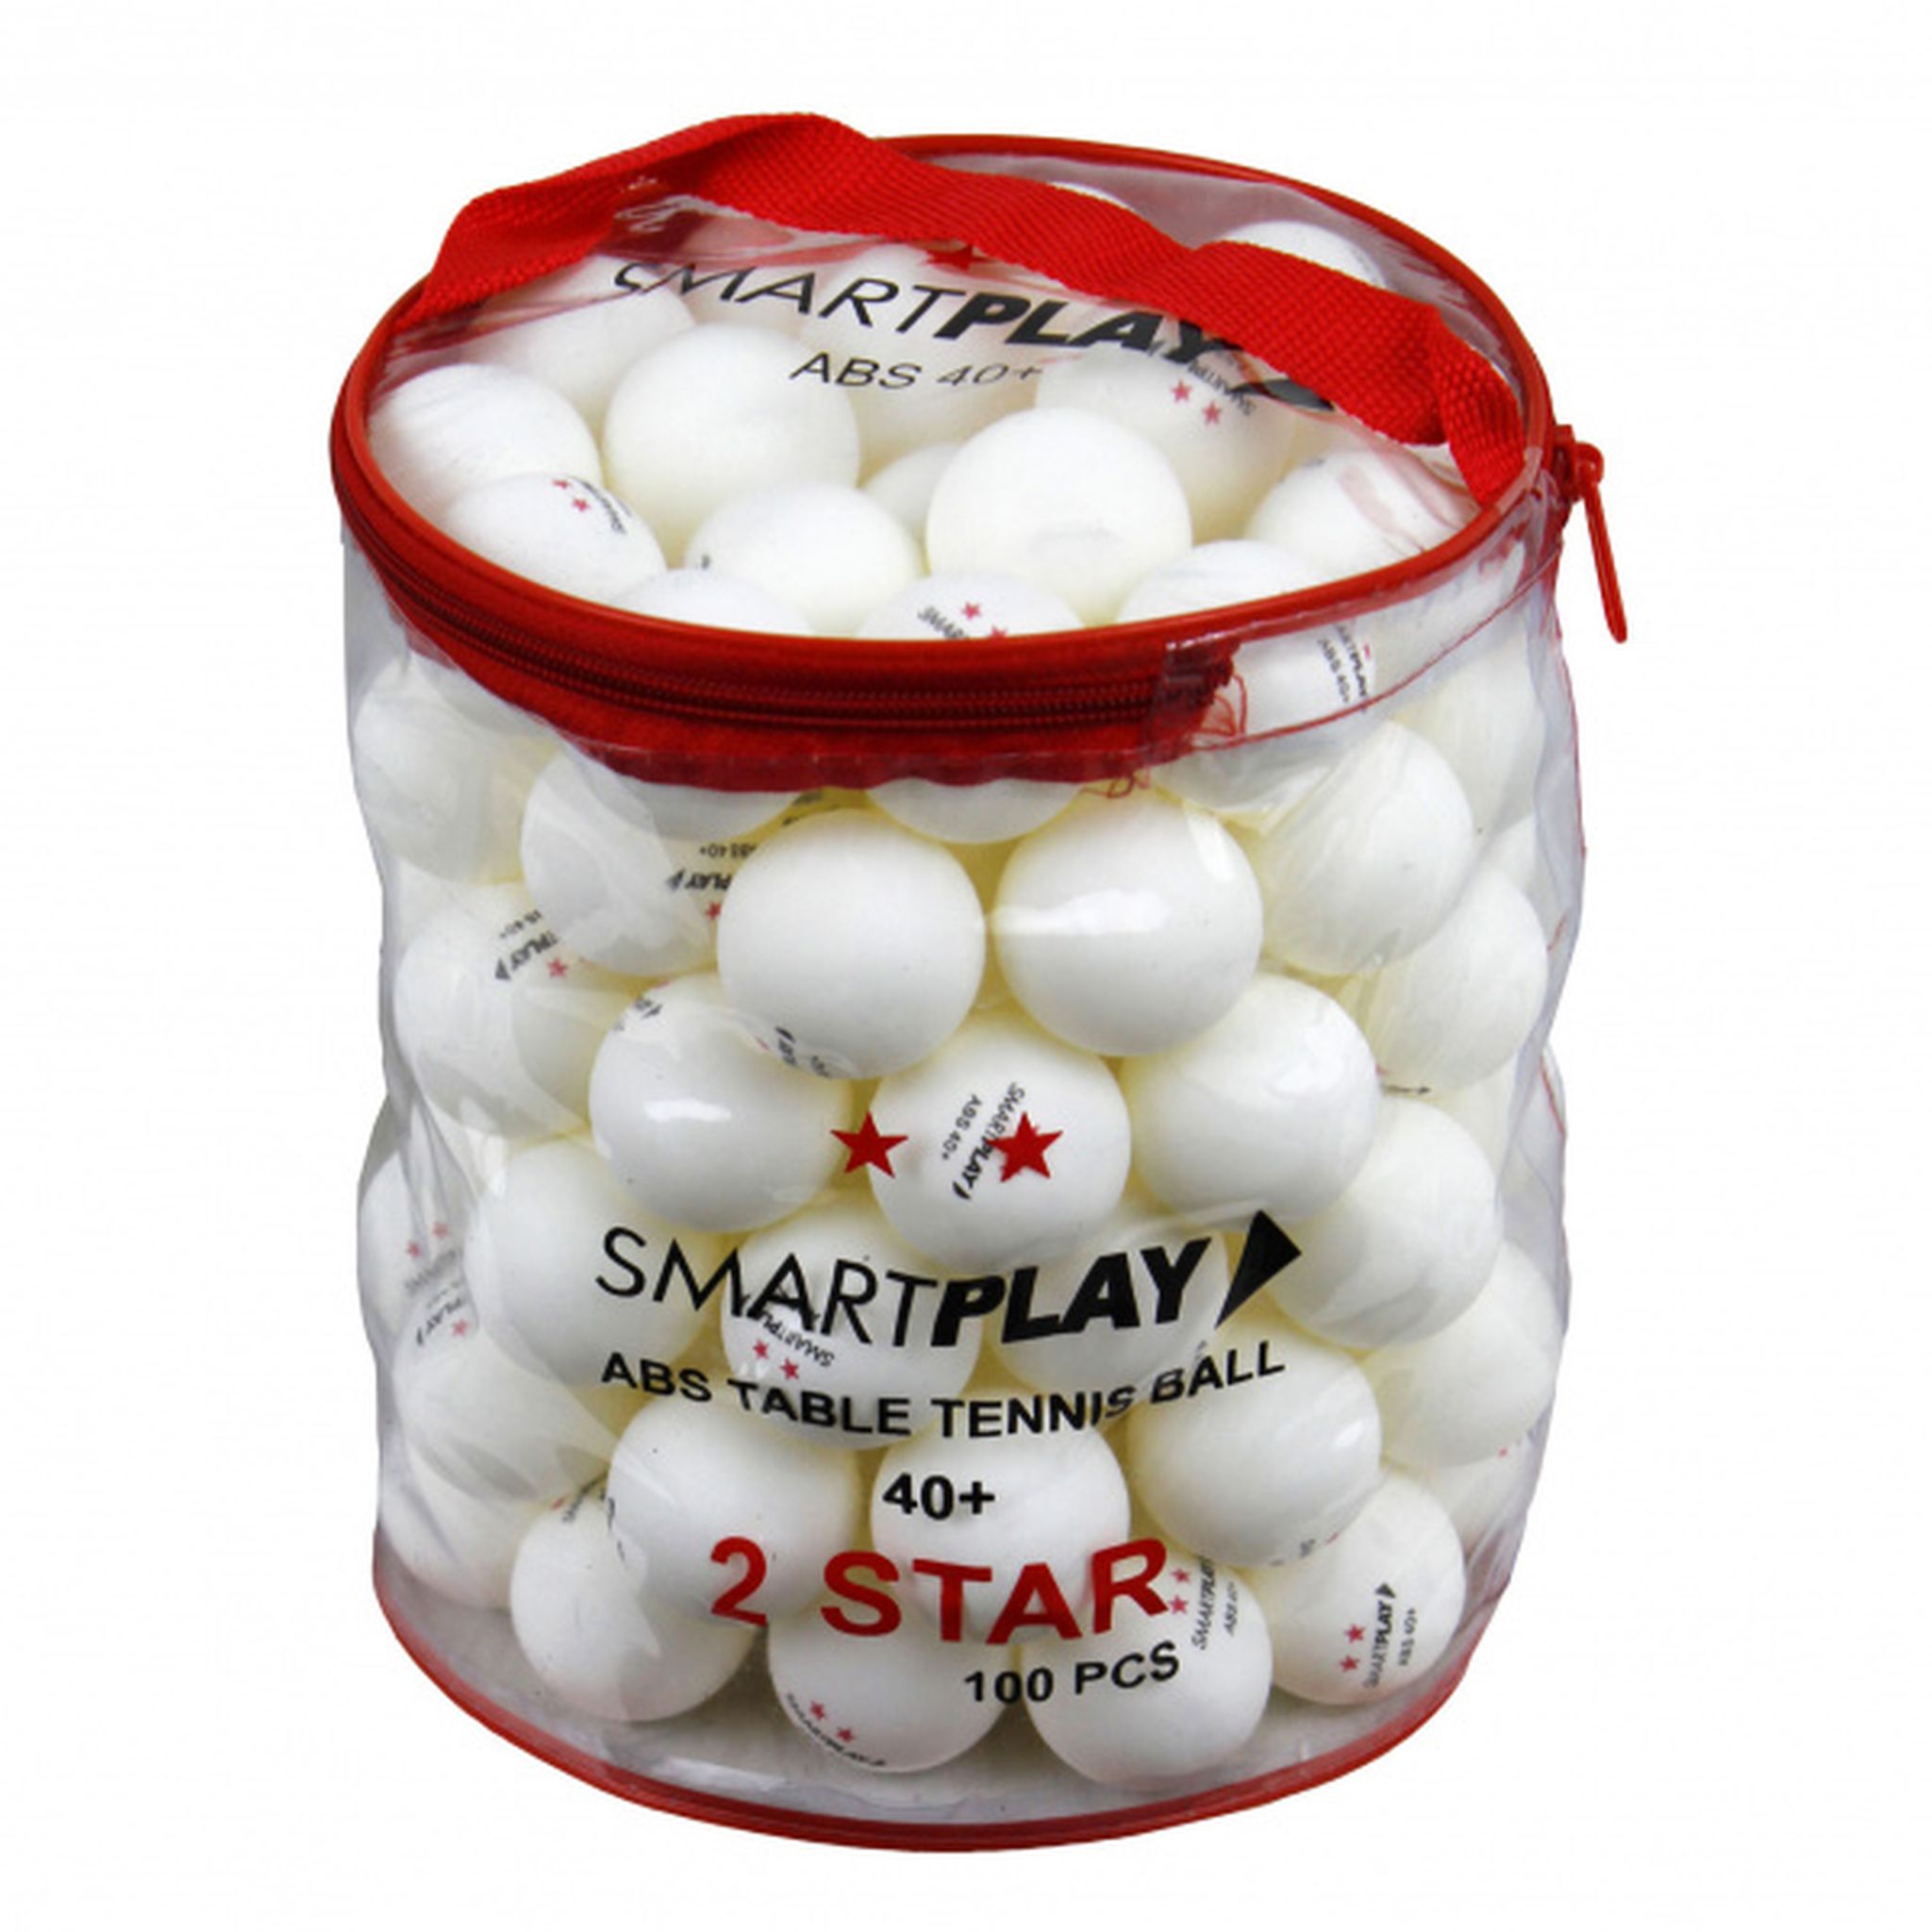 SMARTPLAY 2 Star WHITE Table Tennis Balls - PACK OF 100